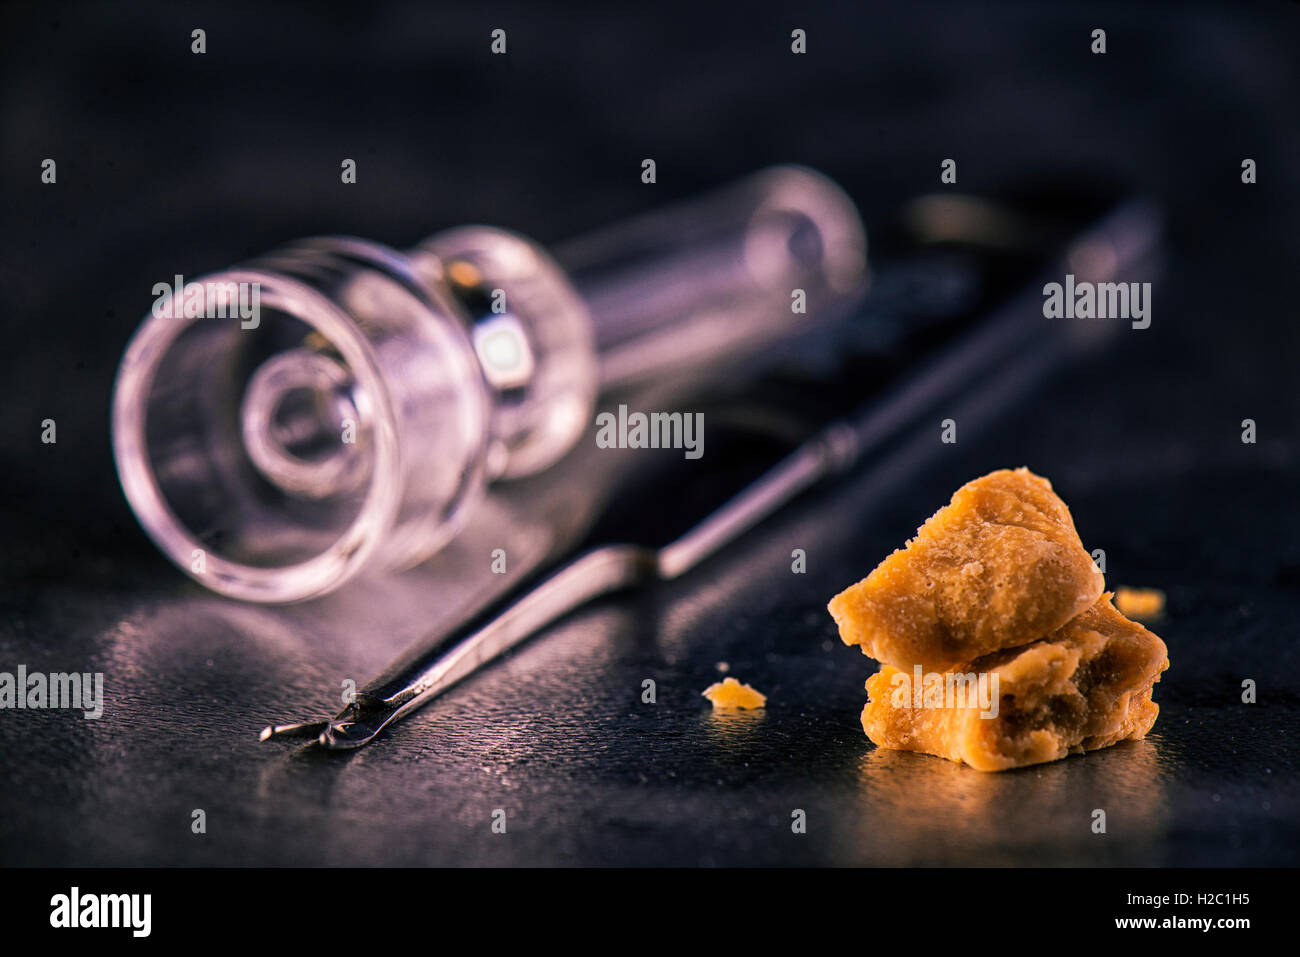 Marijuana extraction concentrate aka wax crumble on dark background with tools Stock Photo